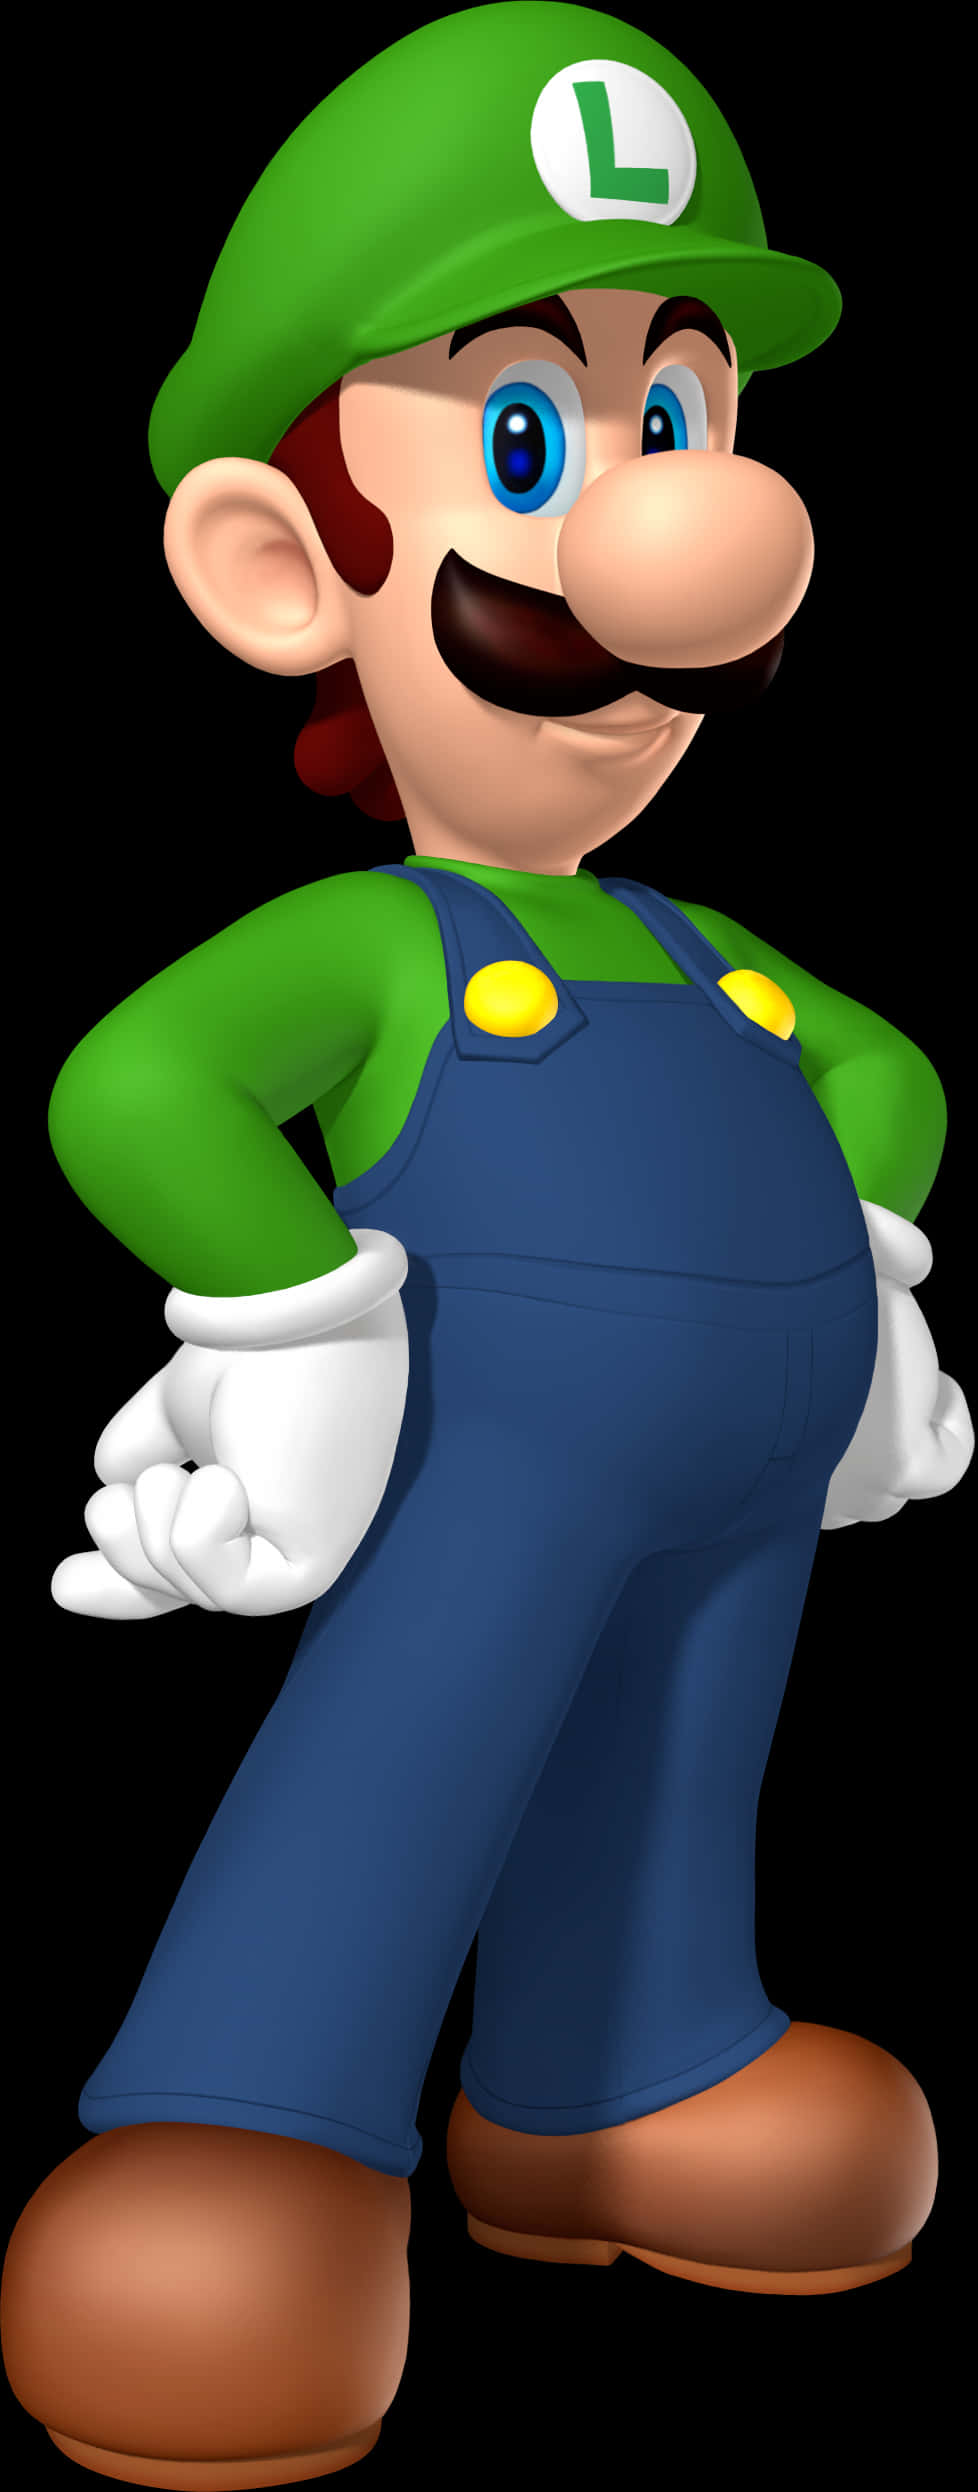 A Cartoon Character Wearing Blue Overalls And Green Shirt PNG